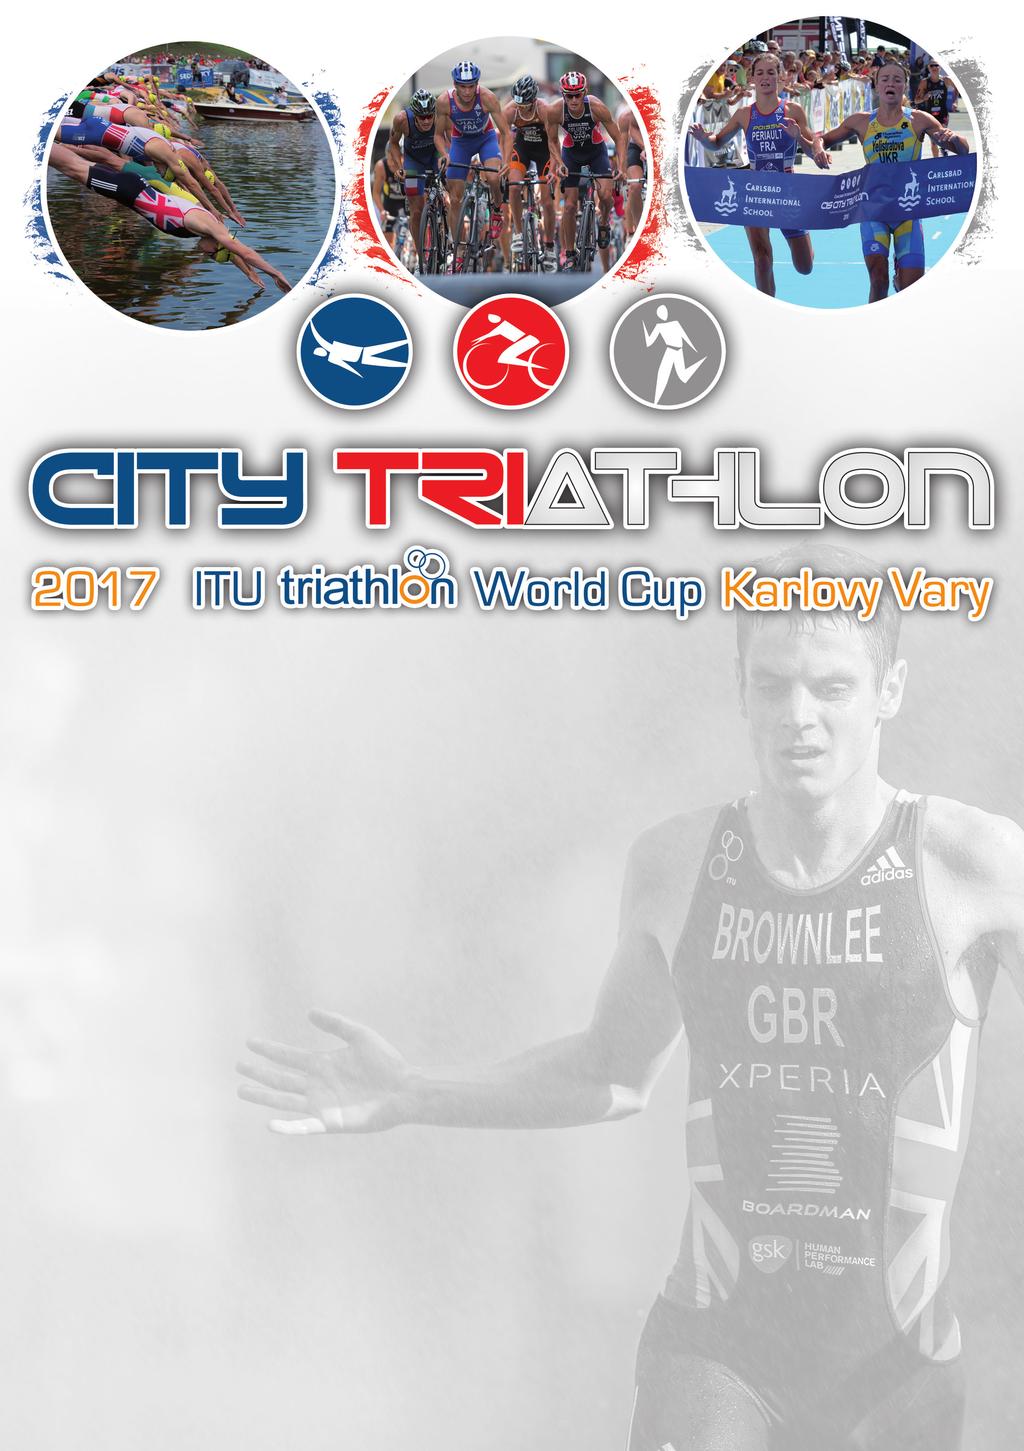 Greetings and welcome to the 2017 Karlovy Vary World Cup, It is with great pleasure that we welcome Karlovy Vary to the ITU World Cup series.